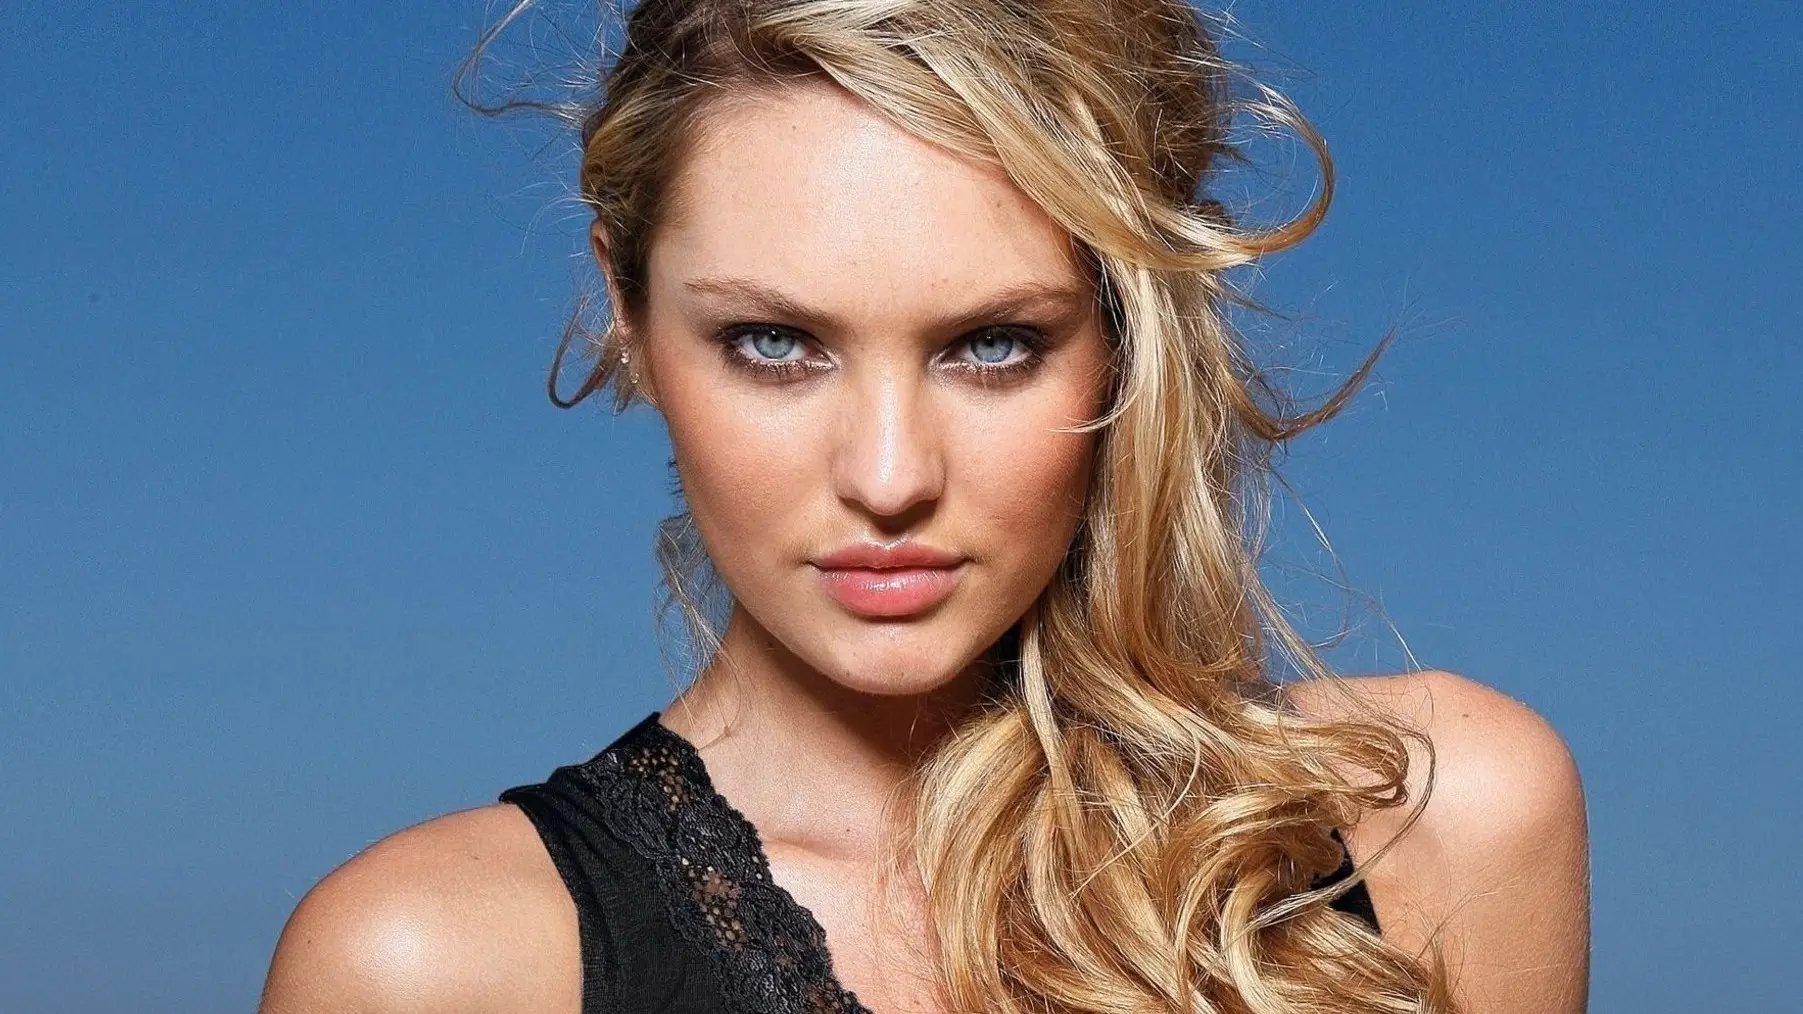 Candice Swanepoel HD Wallpapers